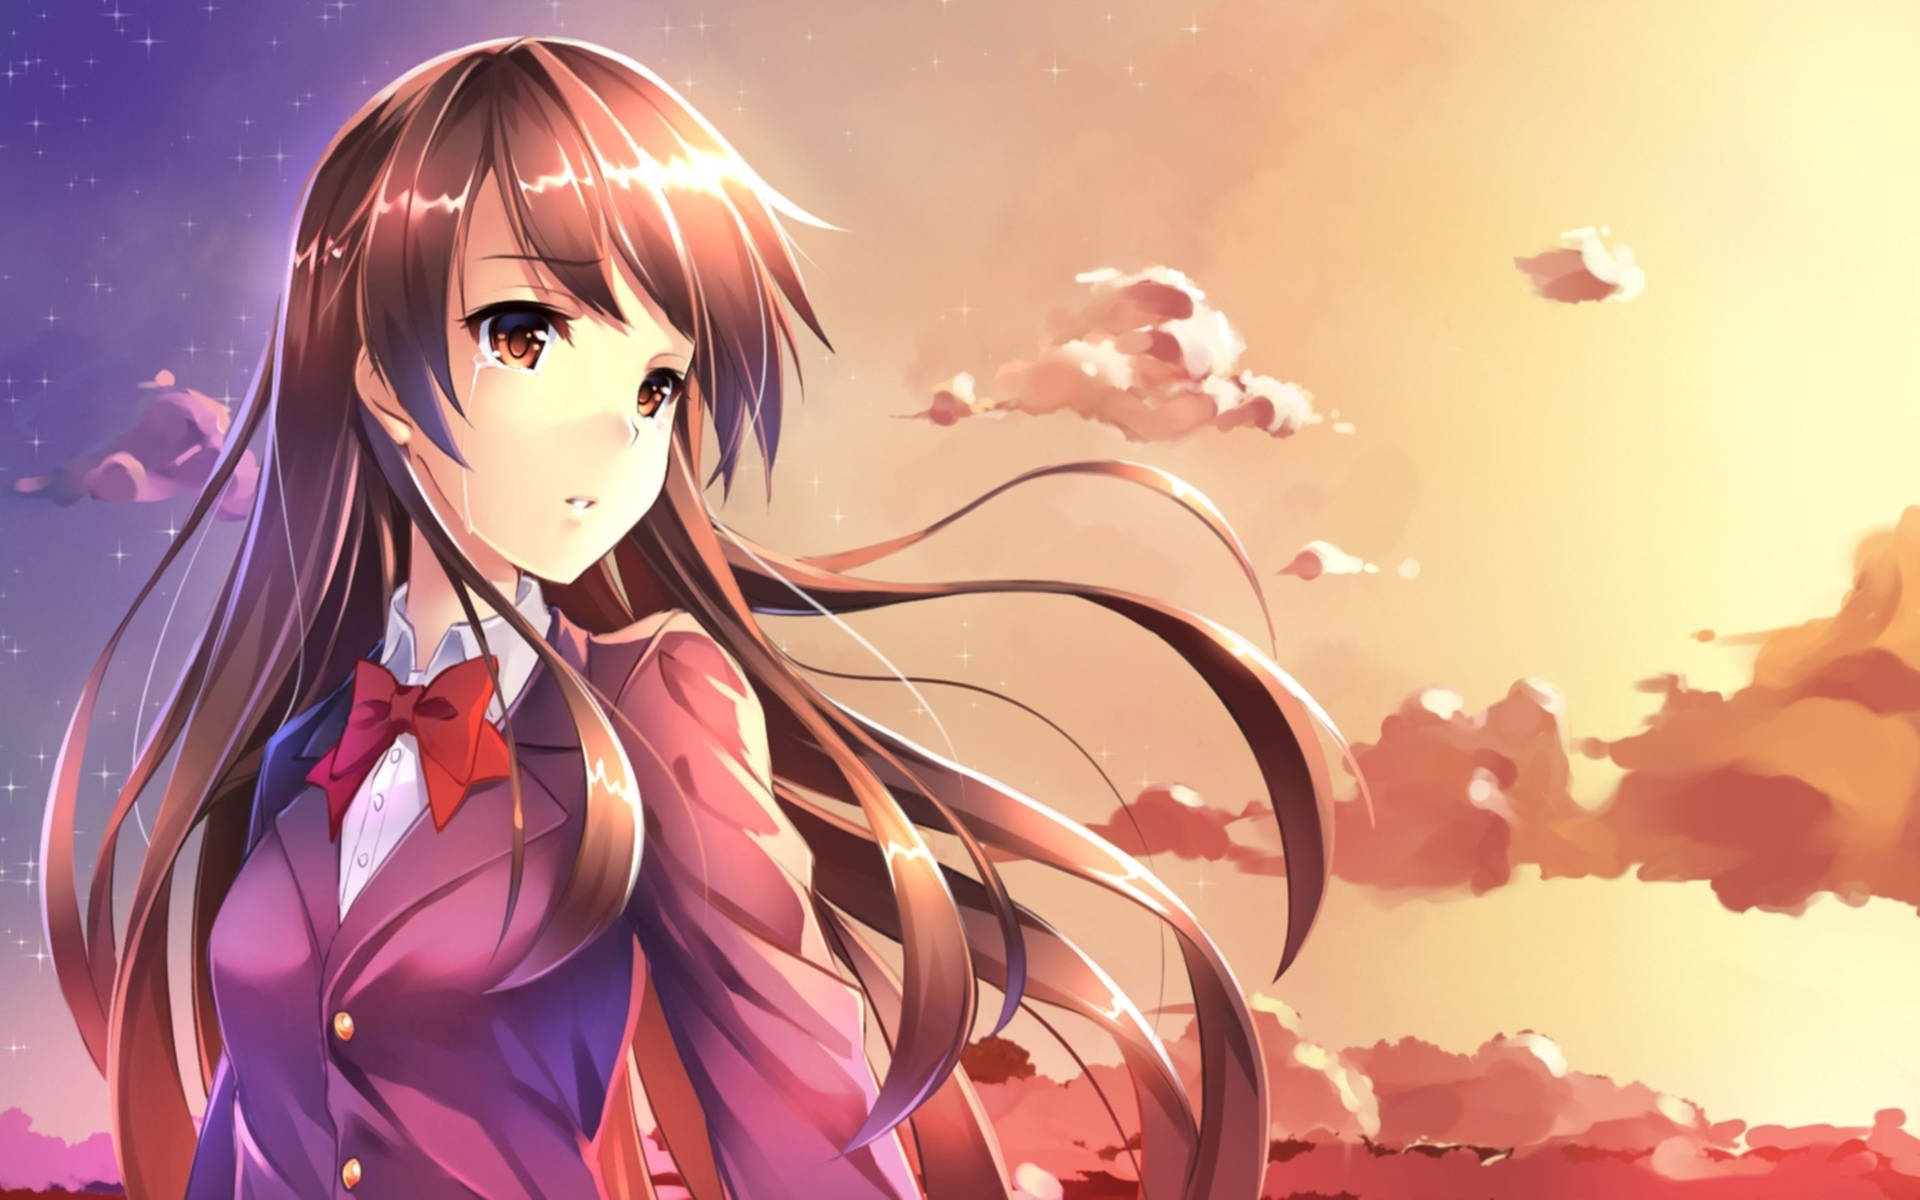 This anime girl is crying during a beautiful sunset, her sadness soothed by the peace of the evening. Wallpaper